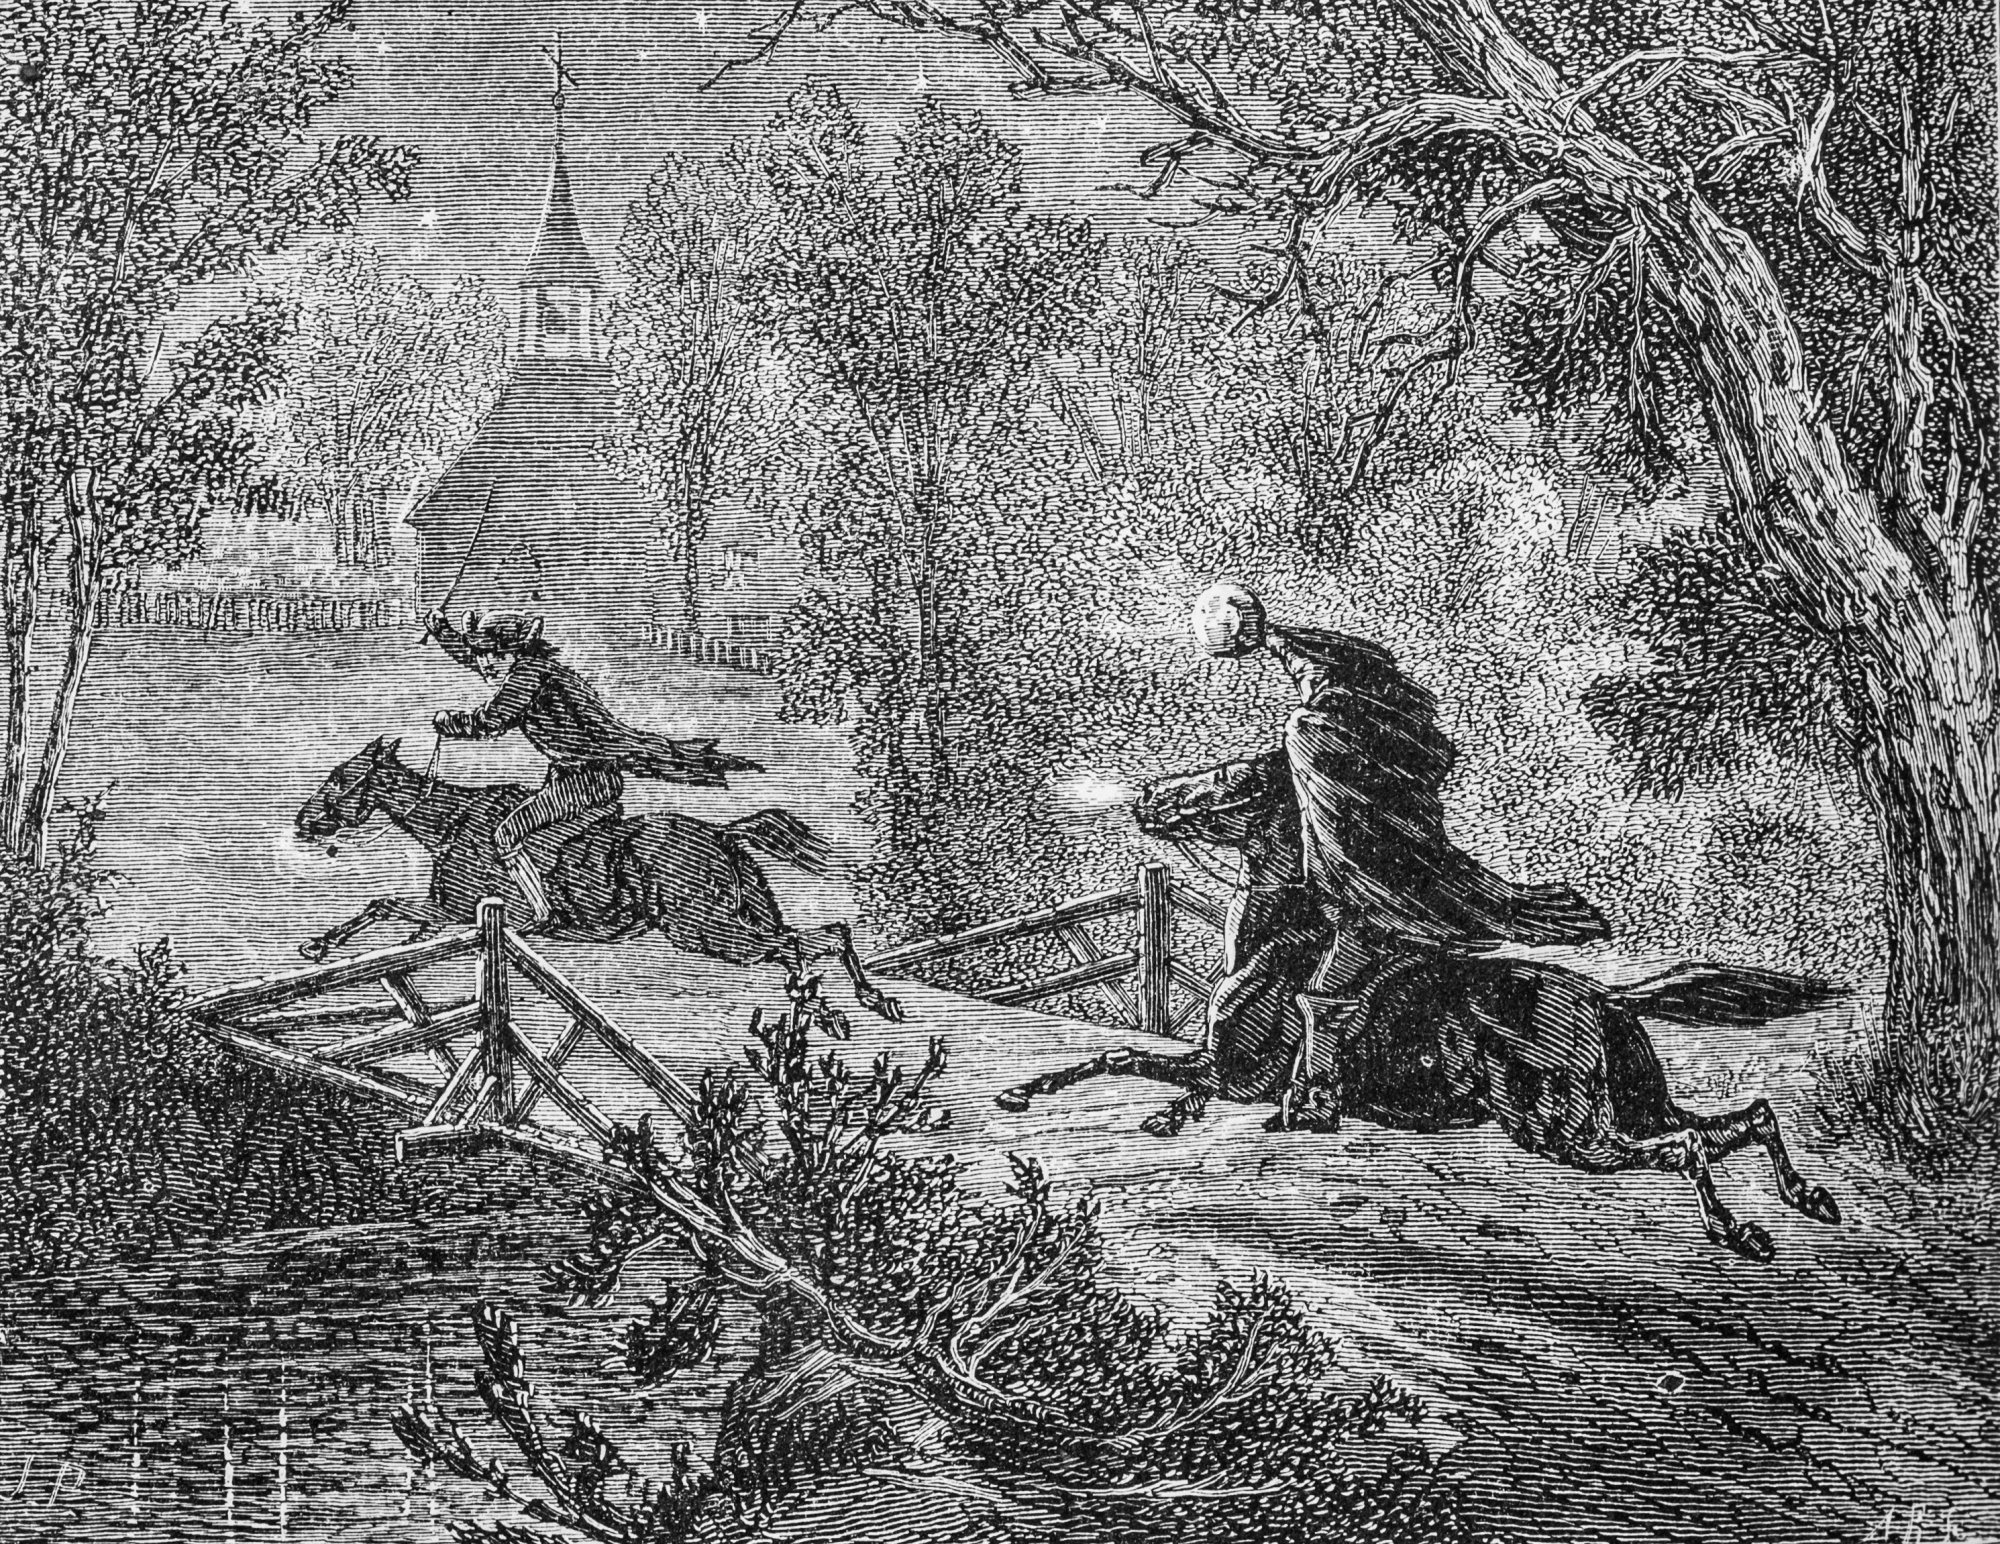 The Headless Horseman chases Ichabod Crane across a narrow bridge as illustrated in an April 1876 issue of Harper's New Monthly Magazine. The Headless Horseman is a fictional character from the short story "The Legend of Sleepy Hollow" published in 1819 by Washington Irving.